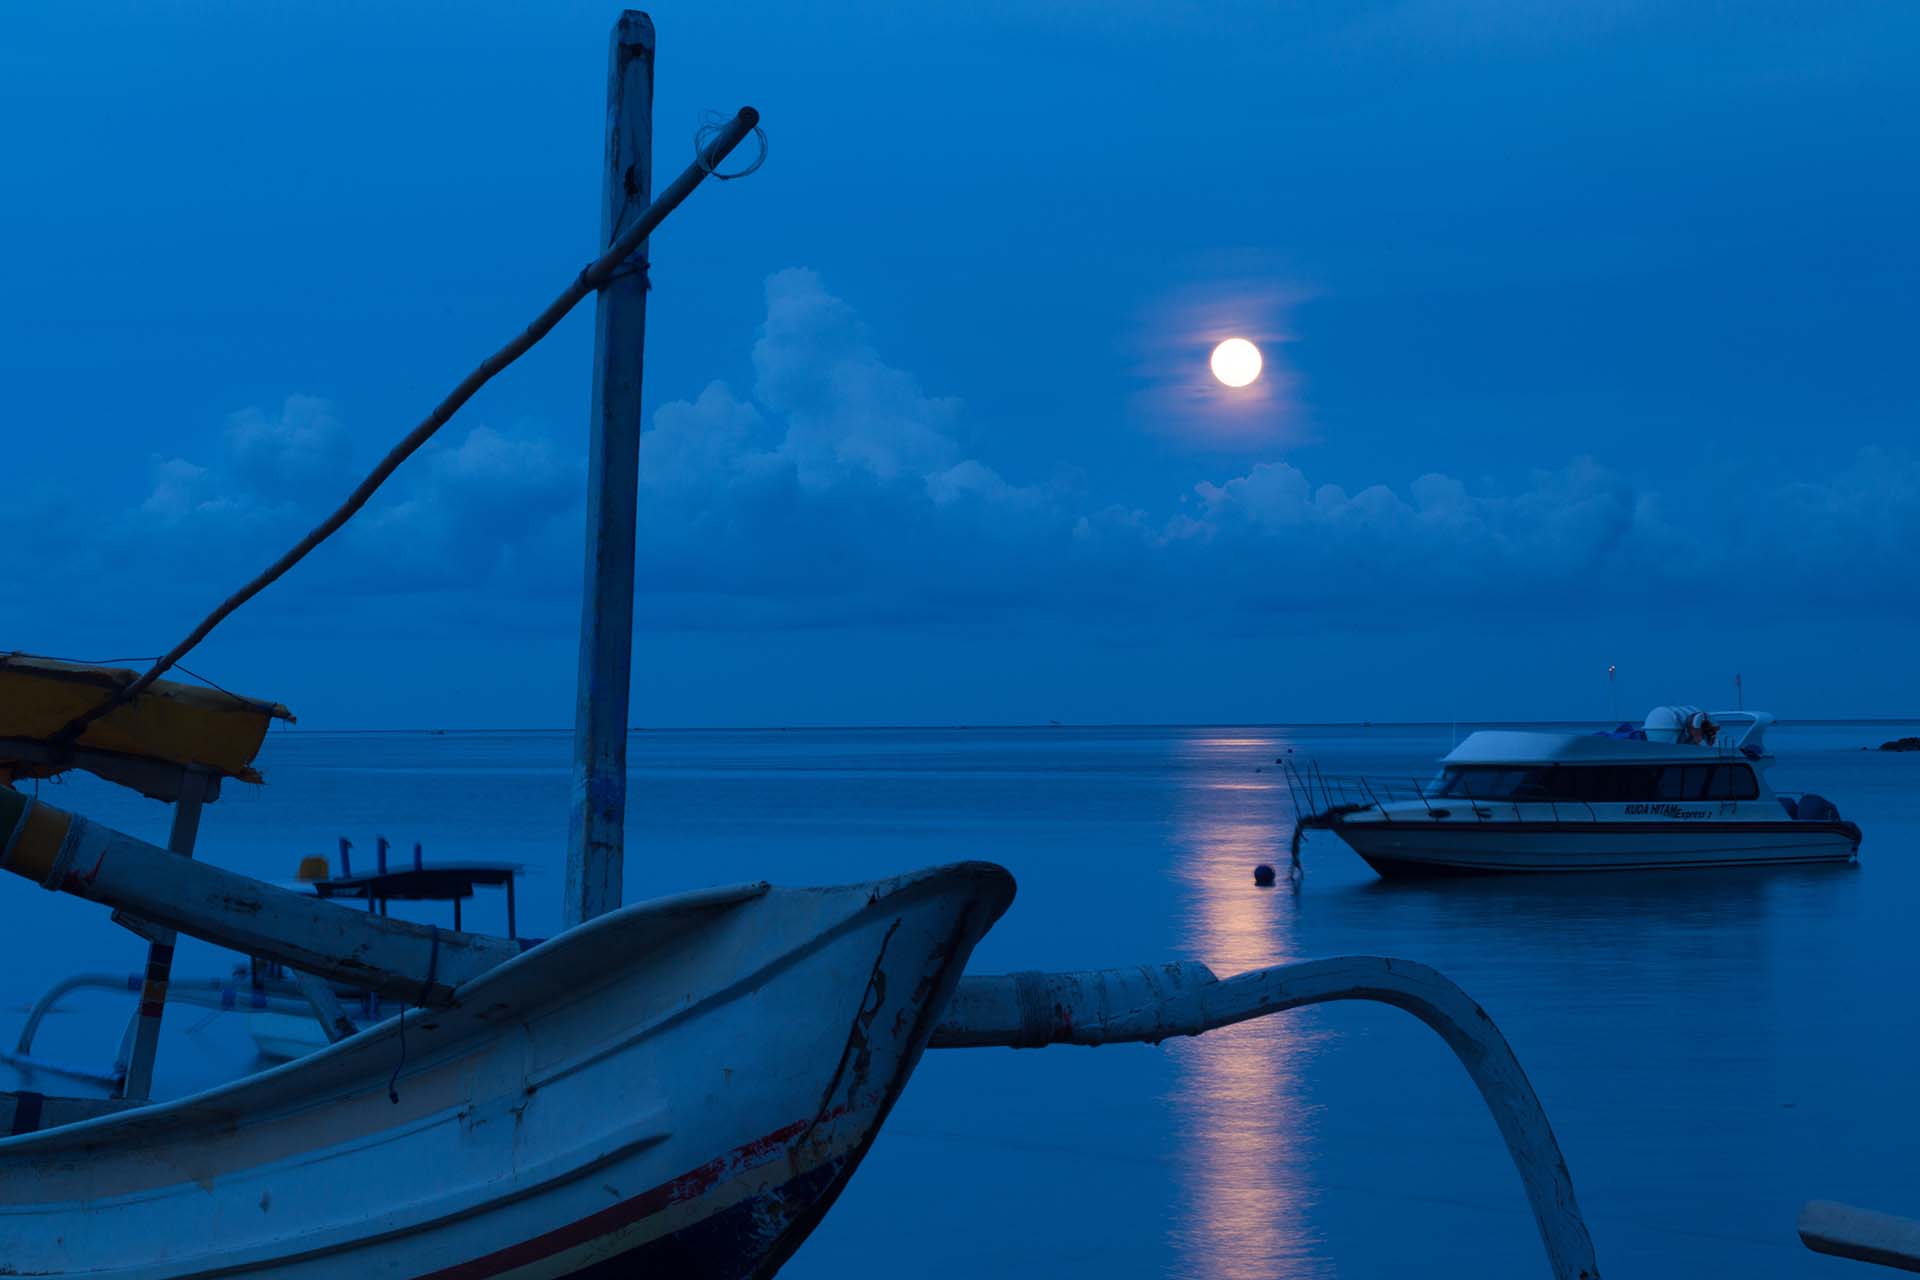 Boats at the shore with a full moon in the sky